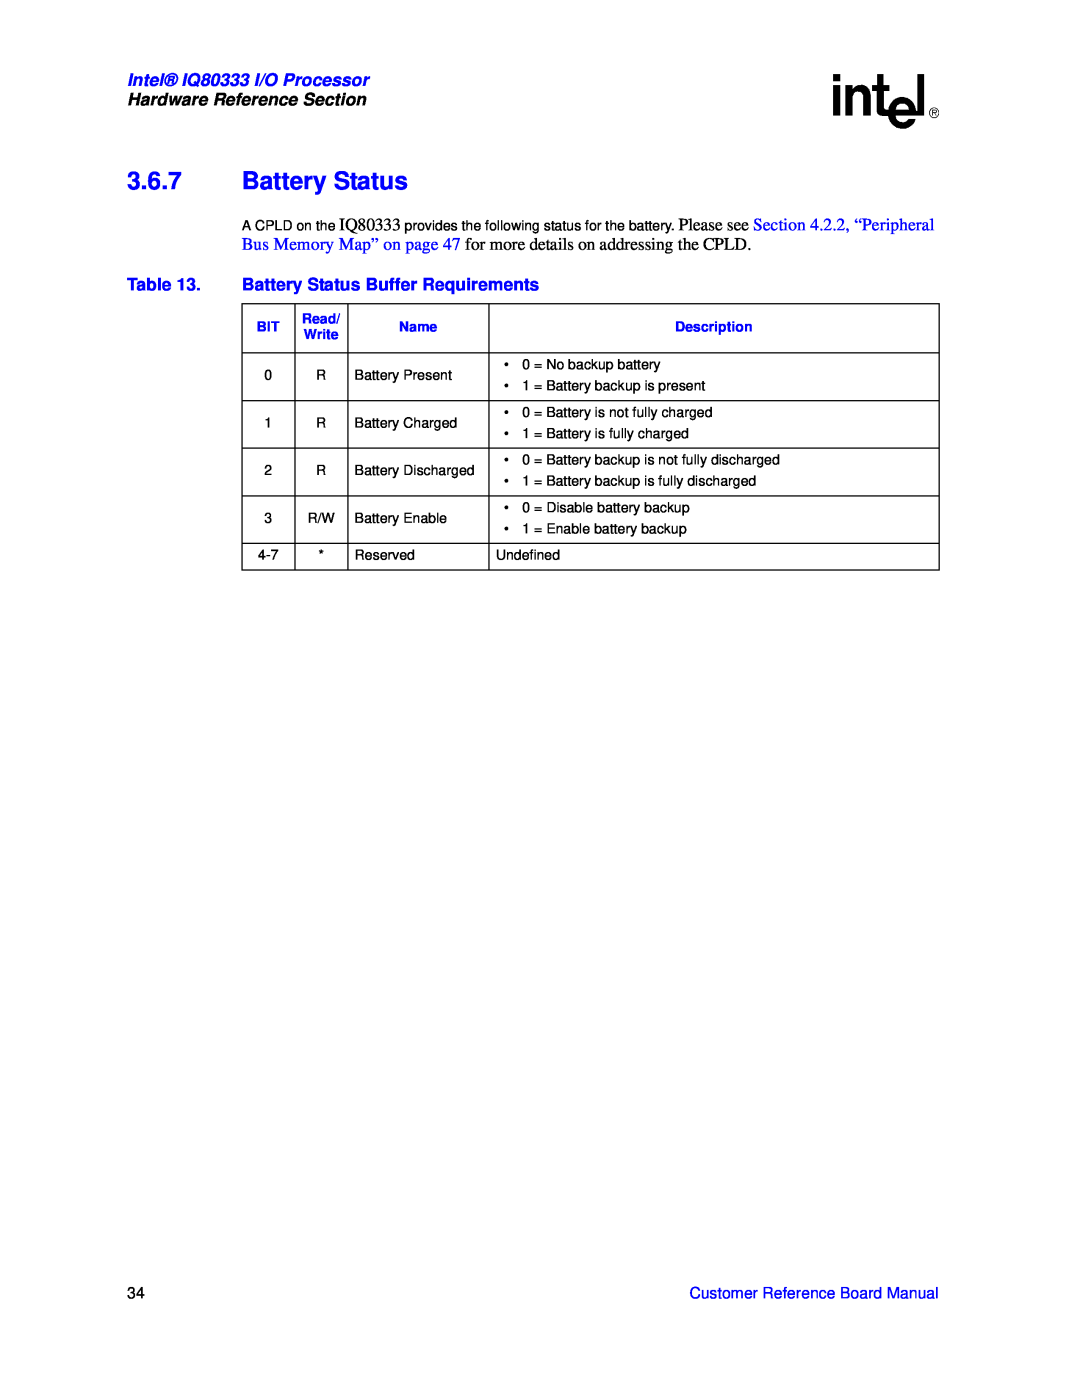 Intel 3.6.7Battery Status, Battery Status Buffer Requirements, Intel IQ80333 I/O Processor, Hardware Reference Section 